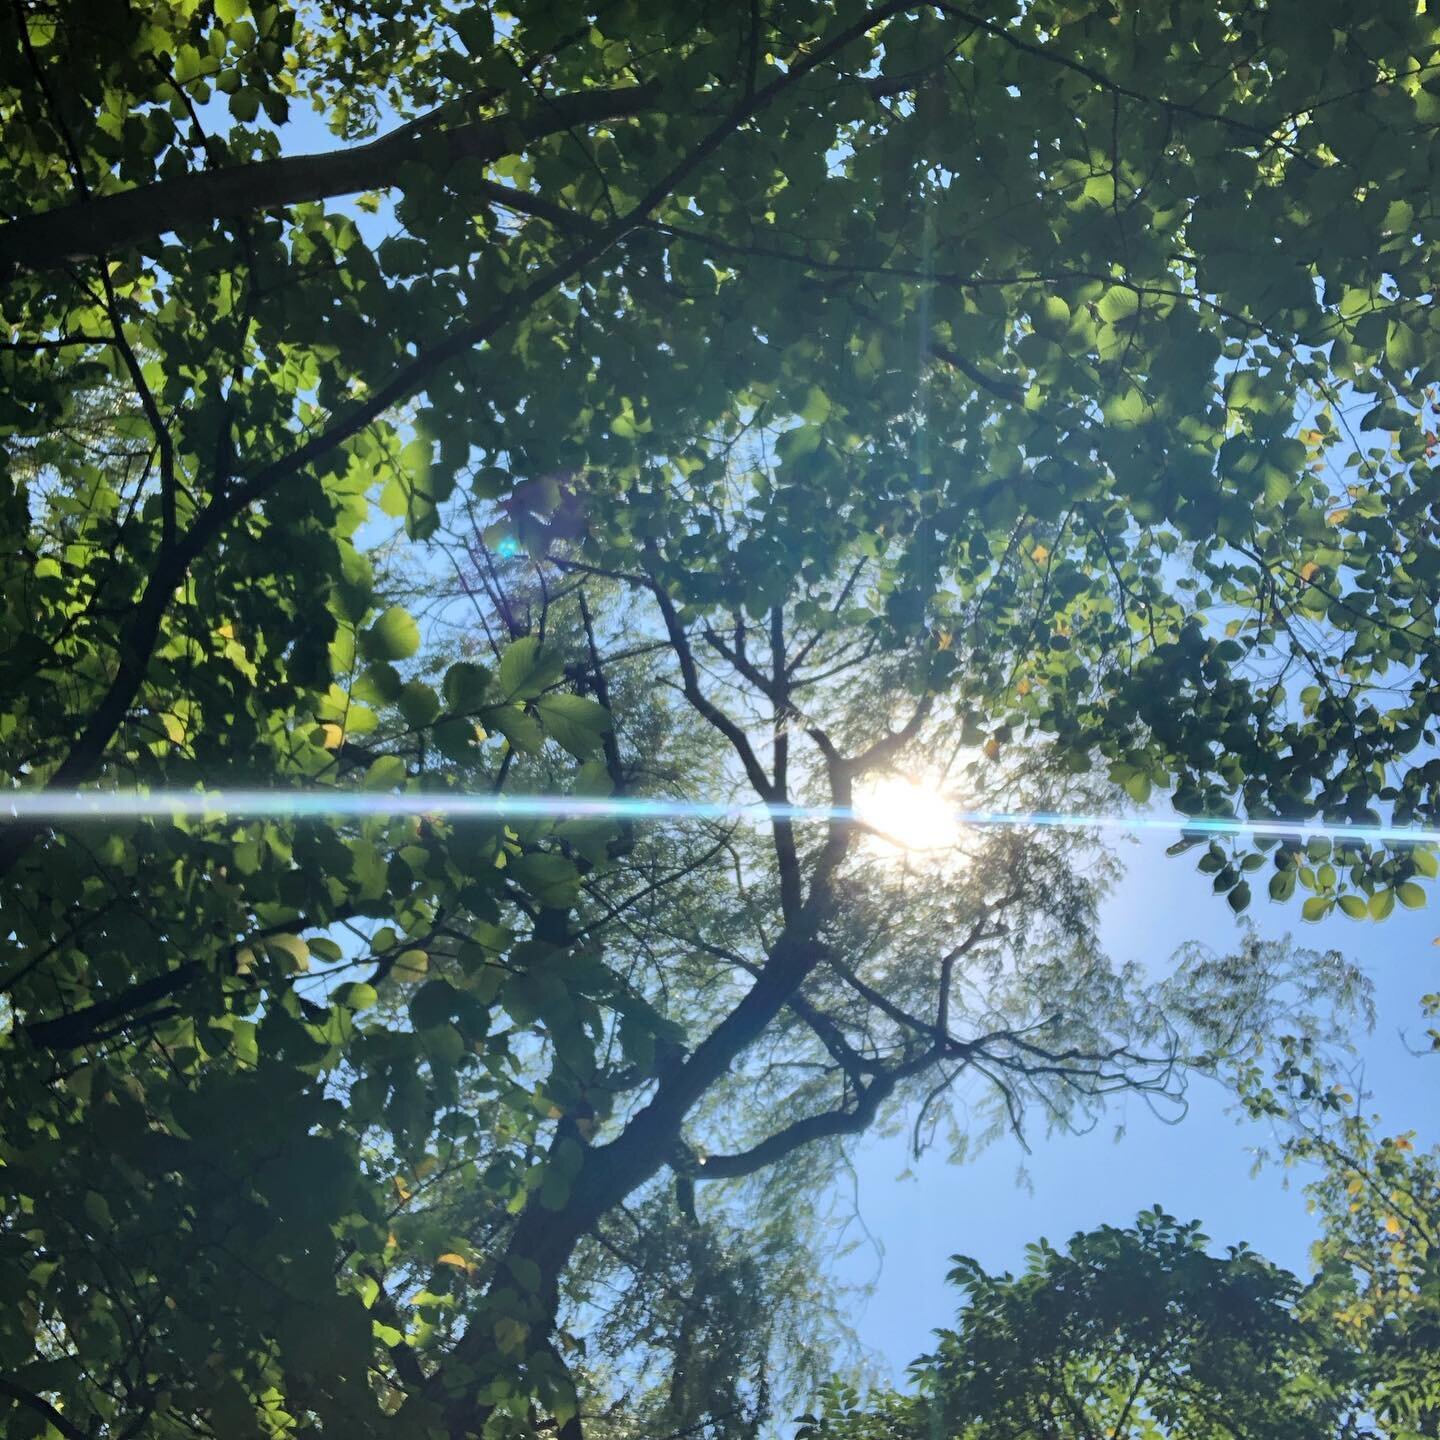 The way the sunlight filters through the leaves is stunning ☀️ #nature #naturephotography #summer #artdaily #everydaybeauty